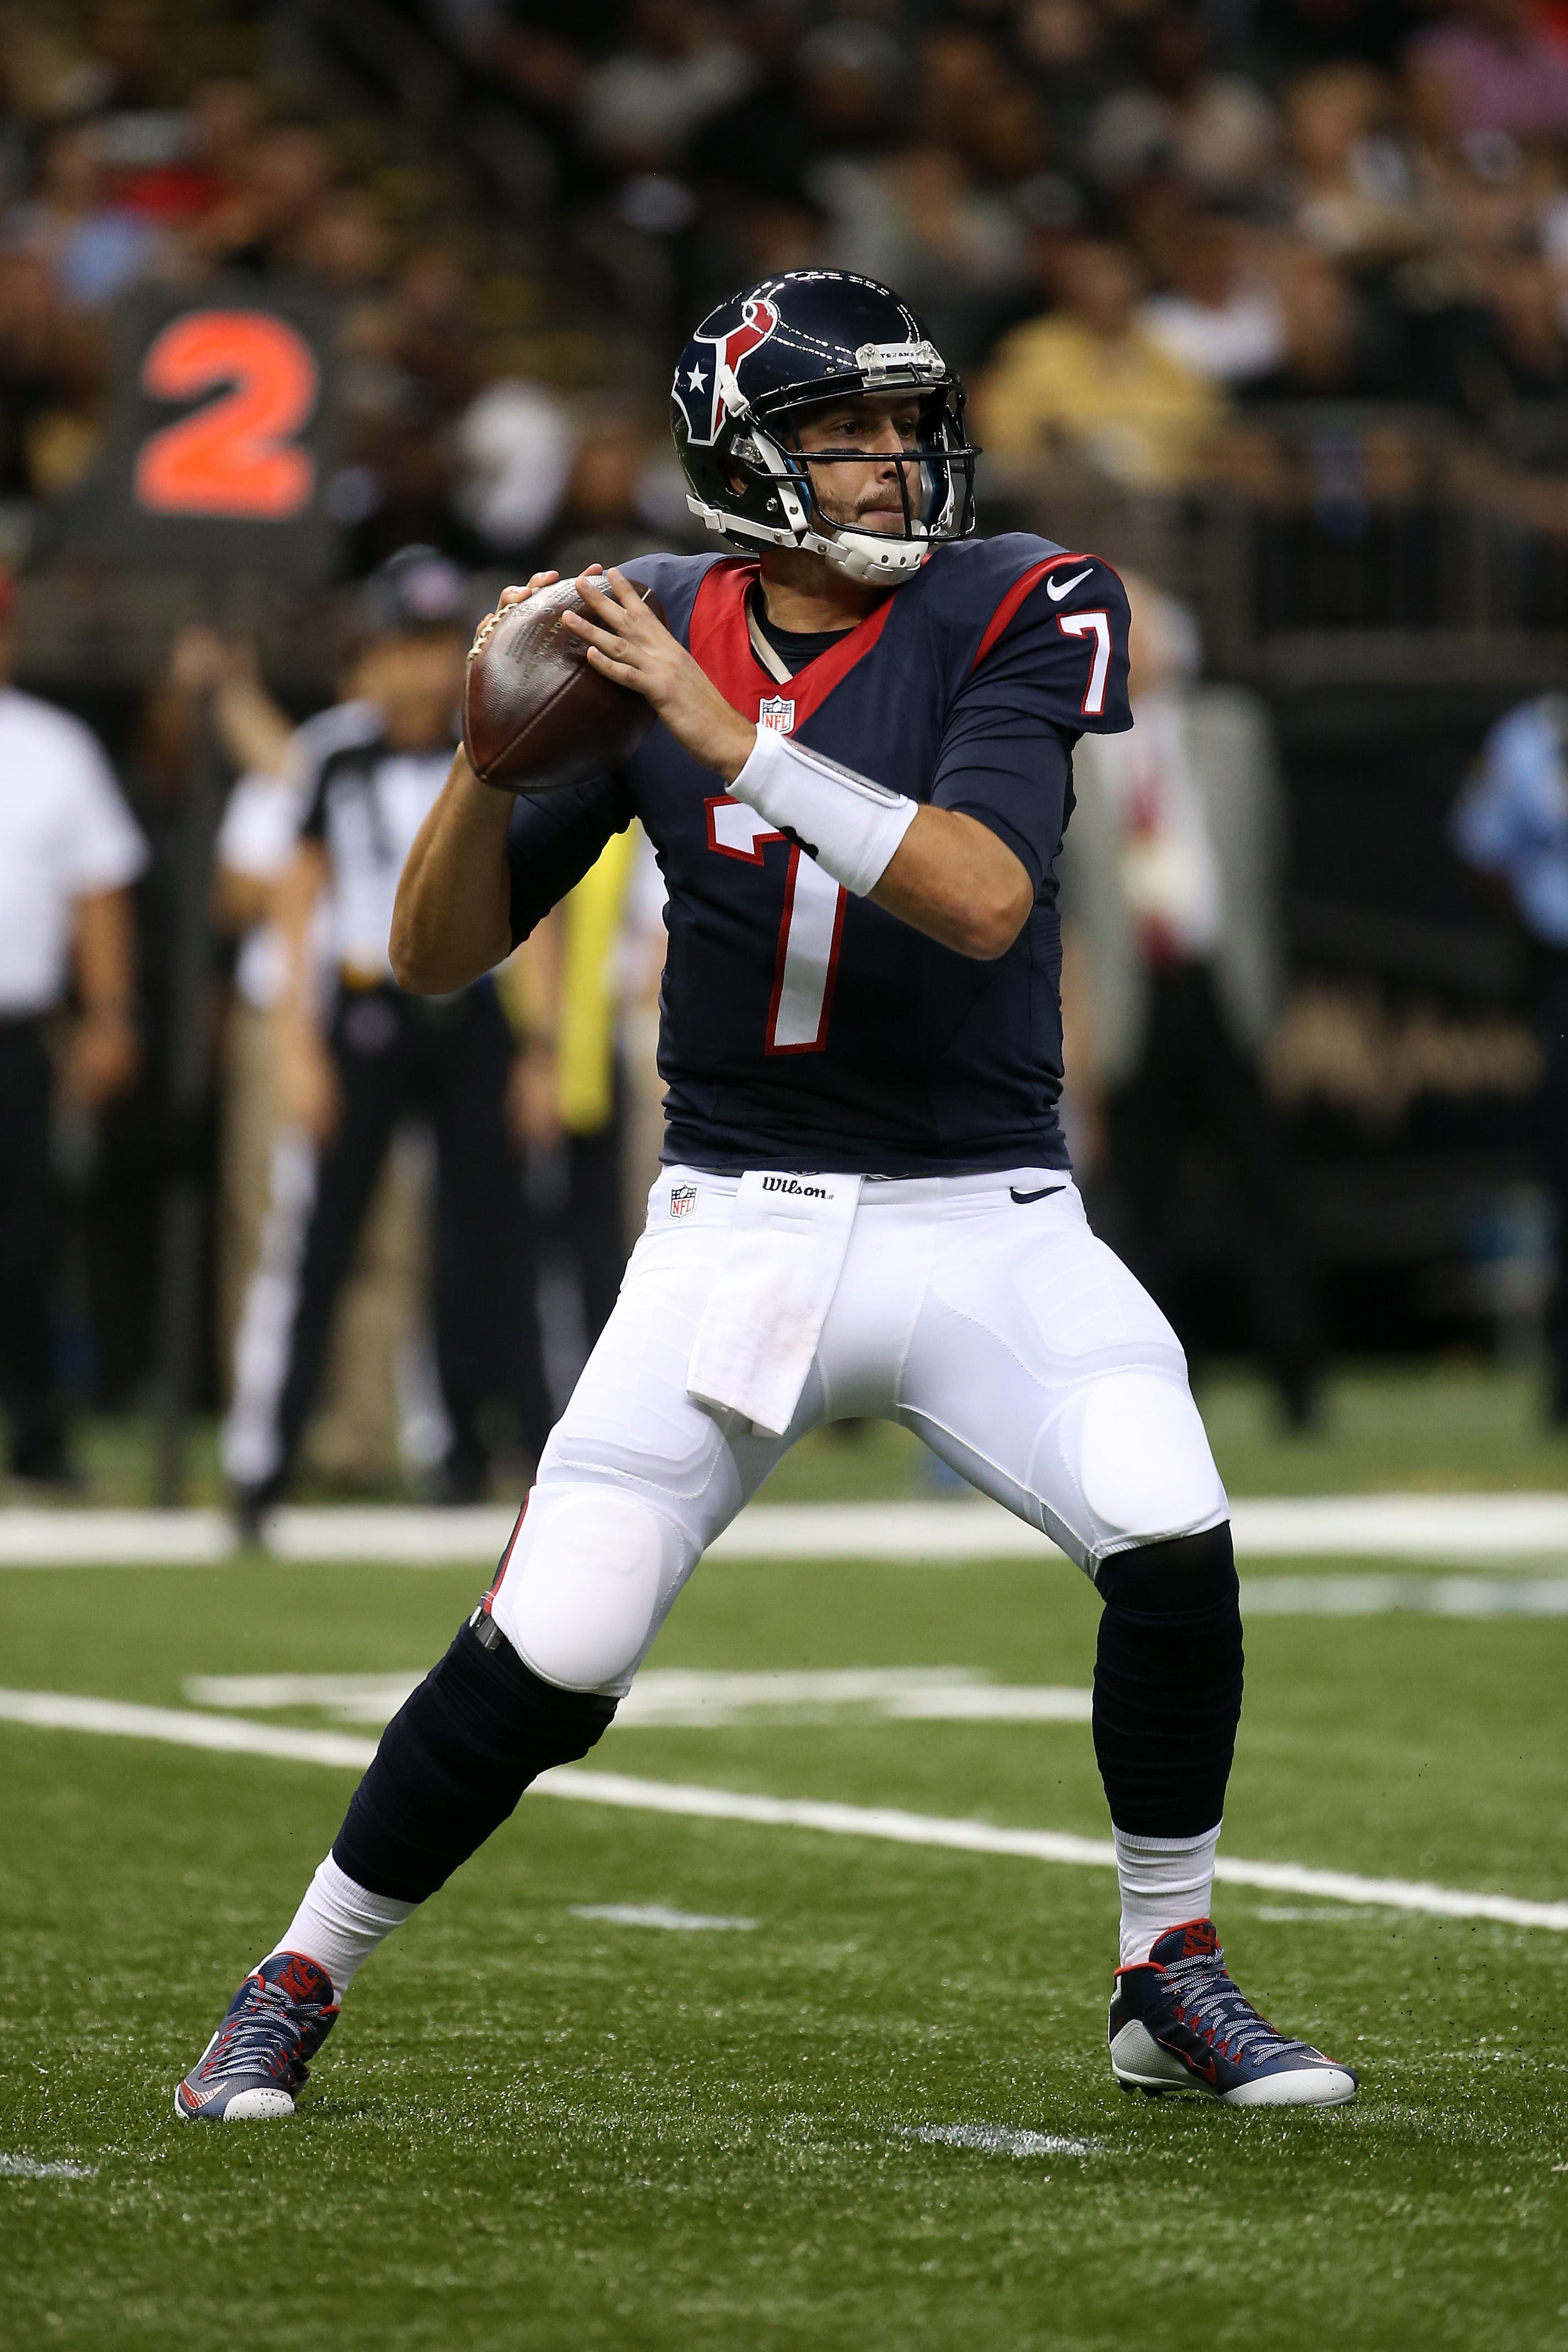 After winning the job in camp, Brian Hoyer will make his first start for the Texans (Getty).